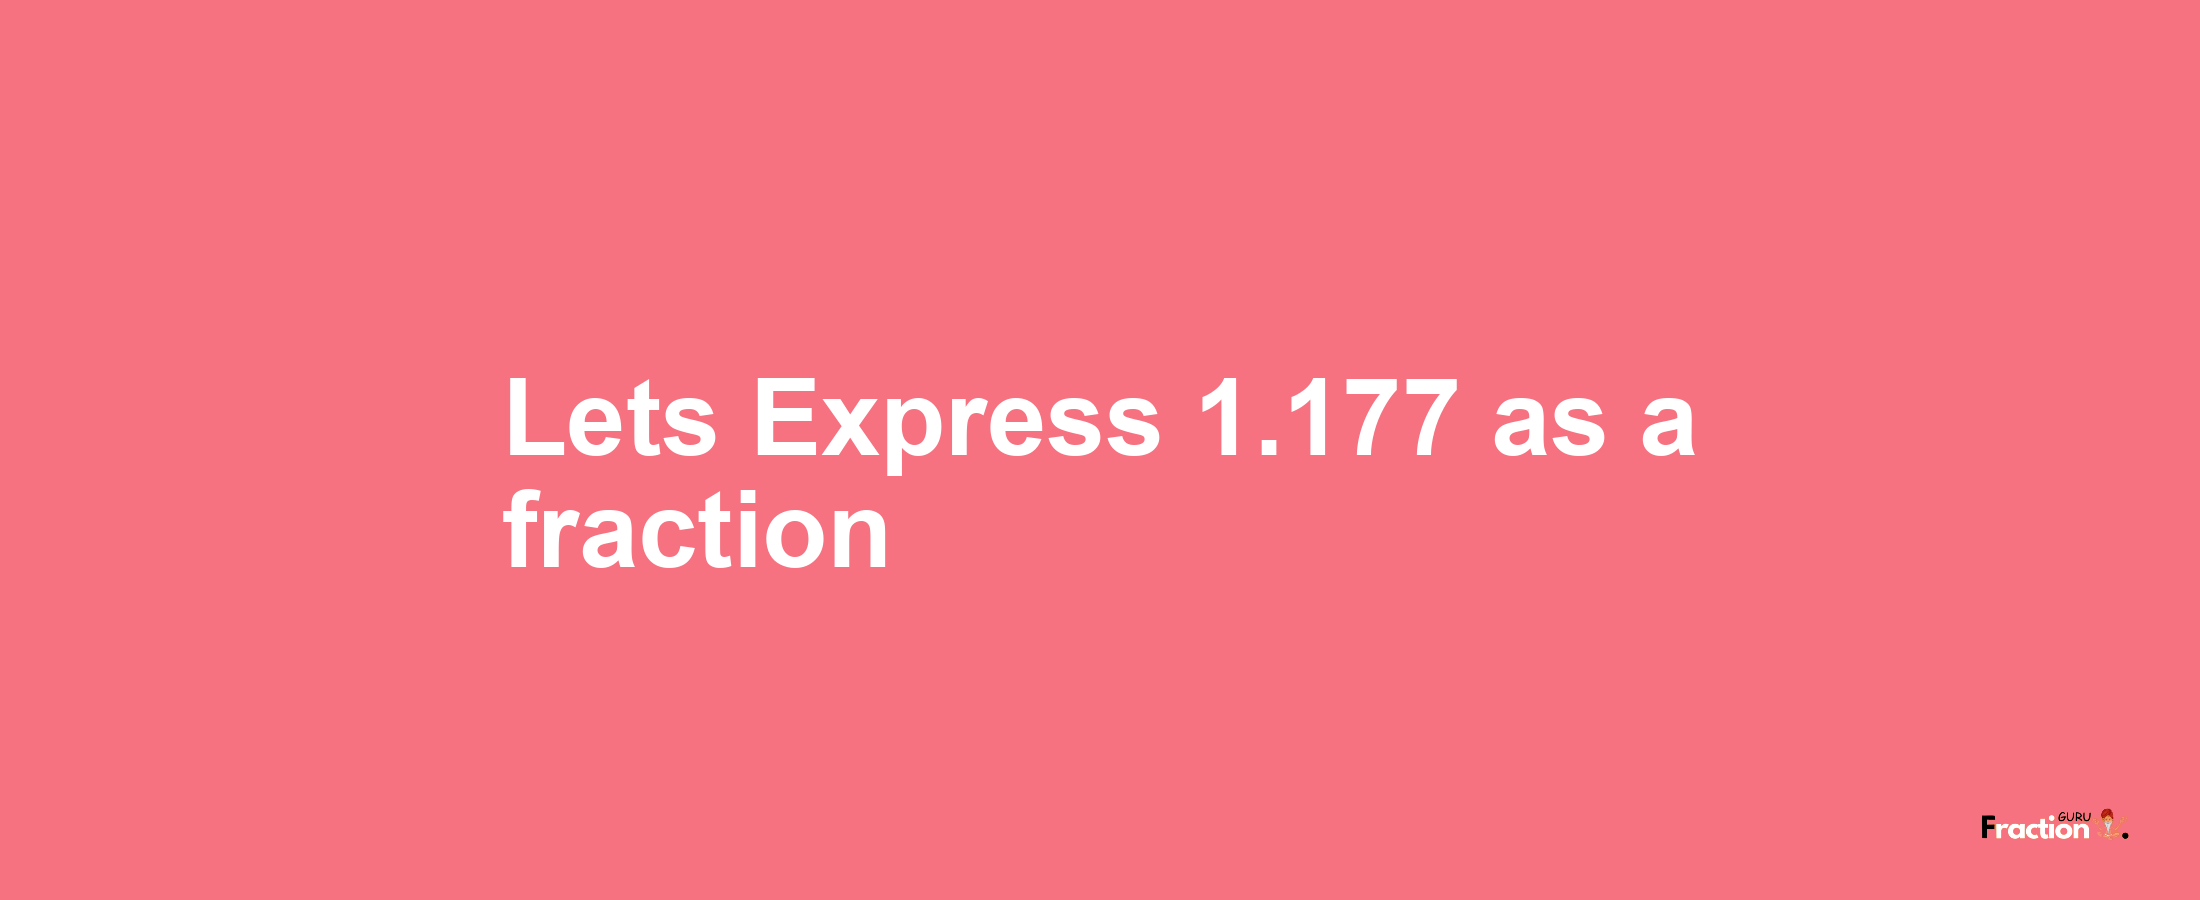 Lets Express 1.177 as afraction